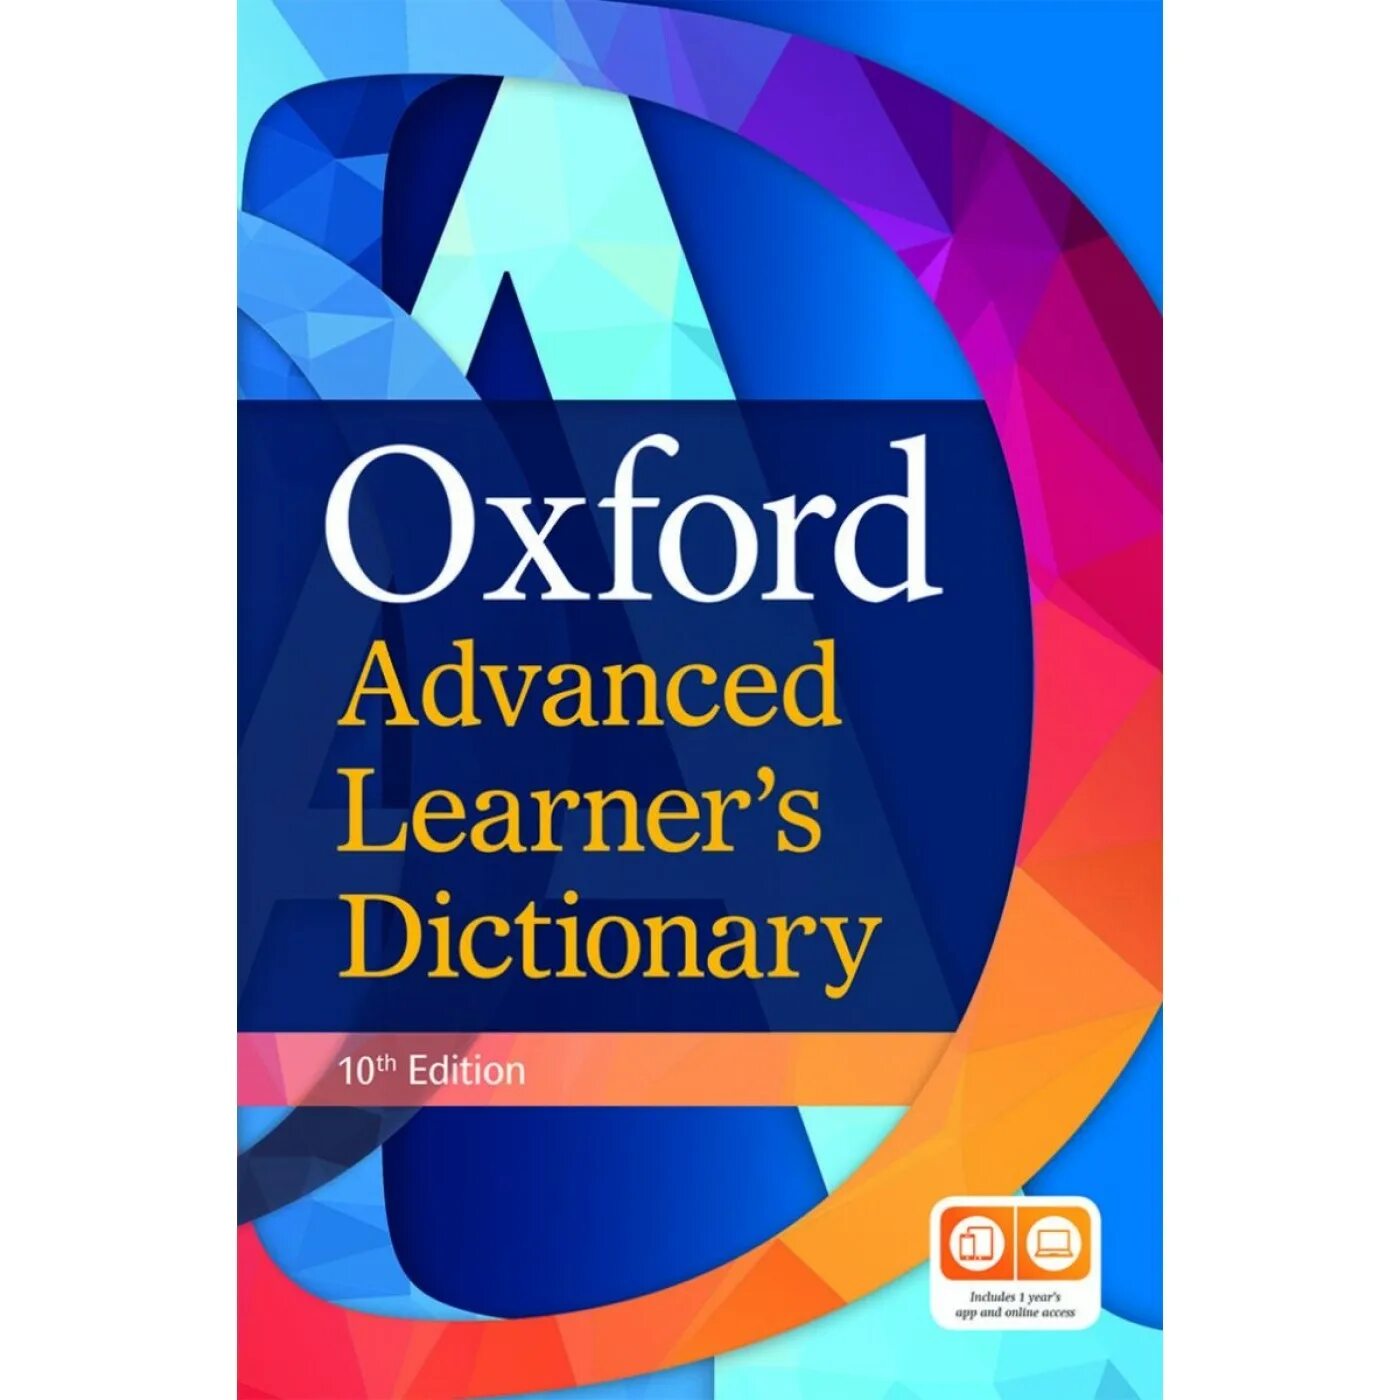 Advanced learner s dictionary. Oxford Advanced Learner's Dictionary 10th Edition. Oxford Advanced Learner's Dictionary книга. Oxford Dictionary for Advanced Learners. Oxford Advanced.